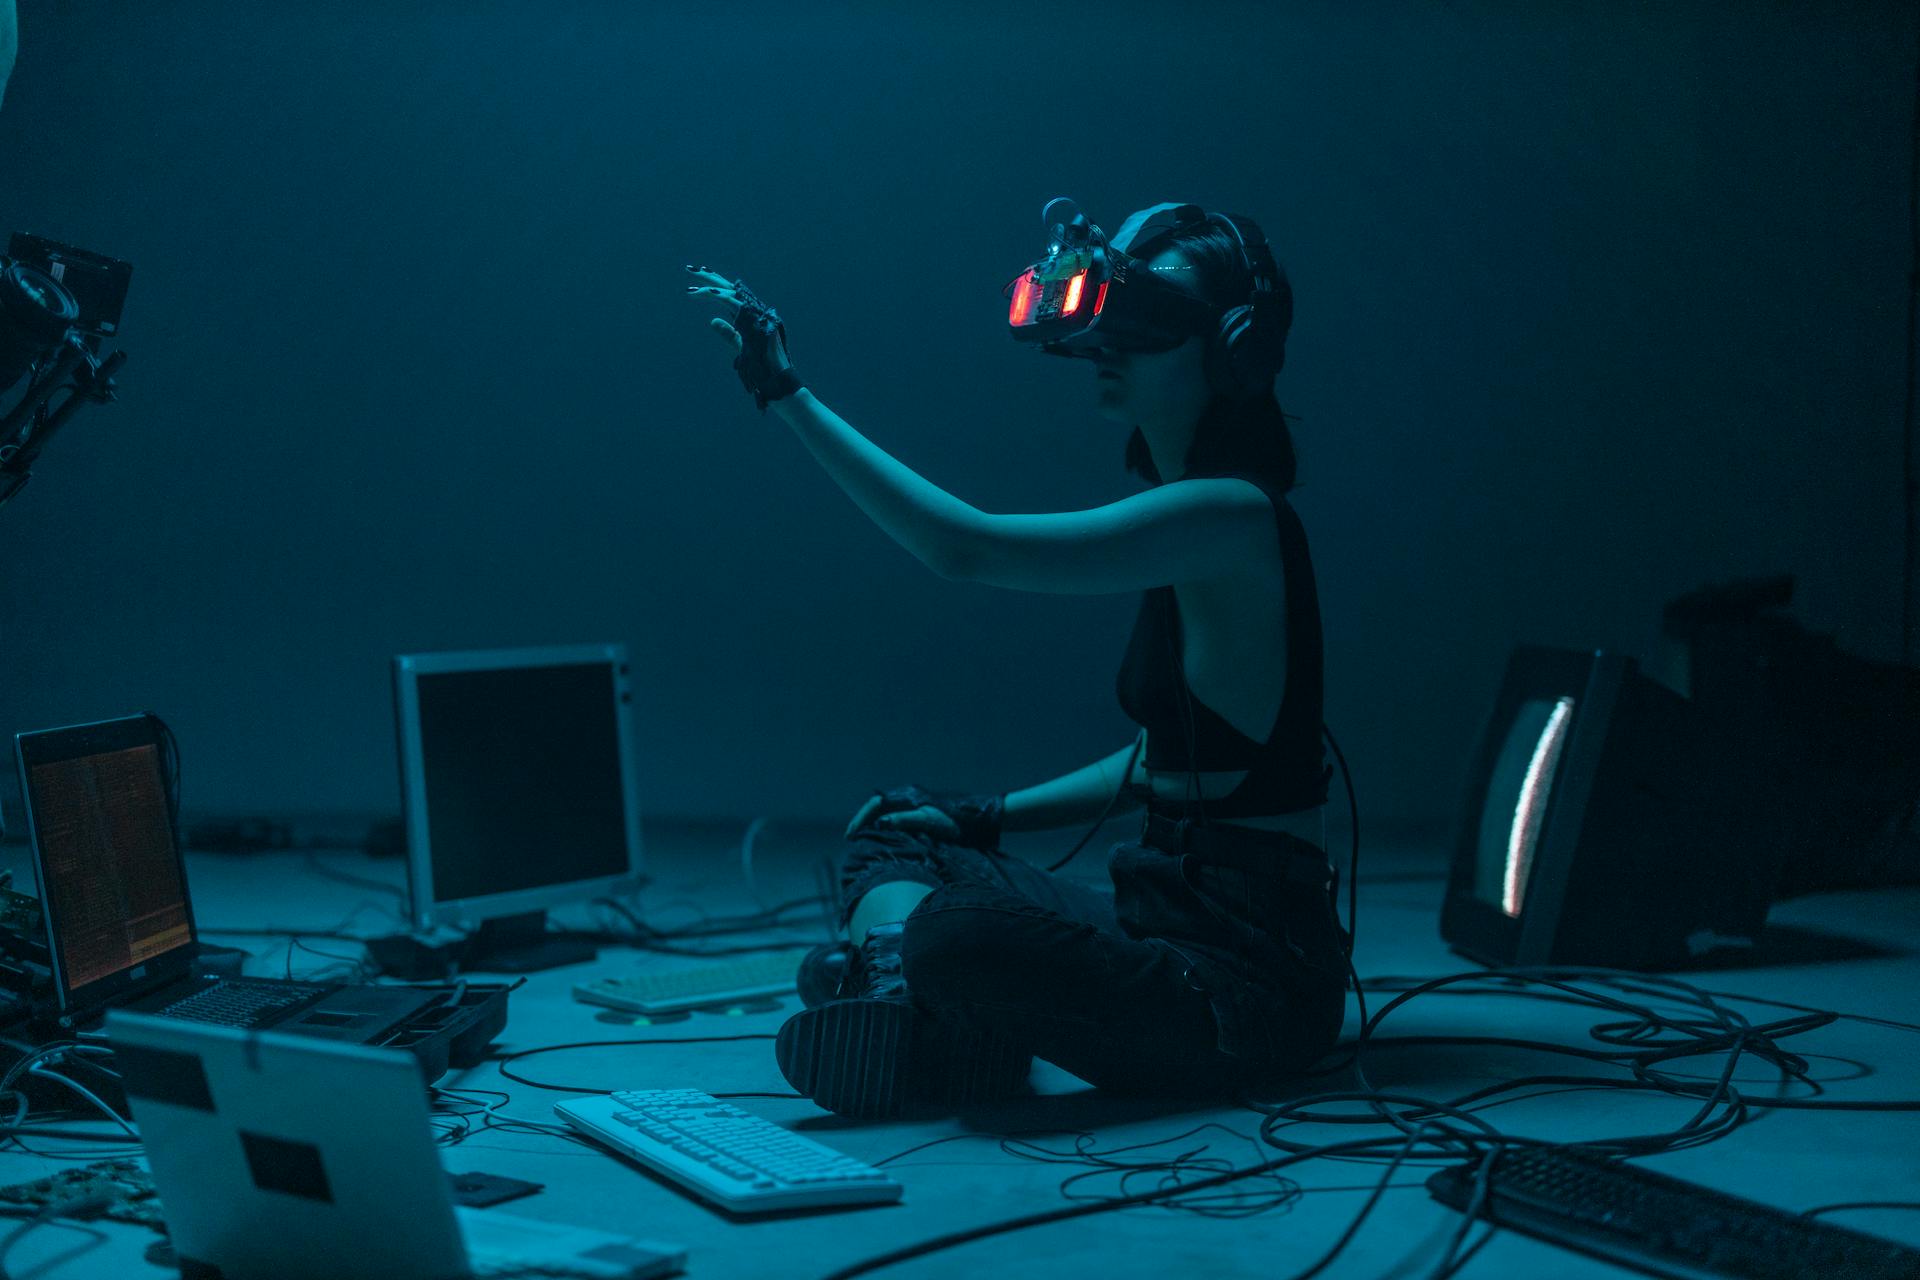 Kneeling woman surrounded by monitors wears glowing red VR goggles while reaching out to something the viewer cannot see